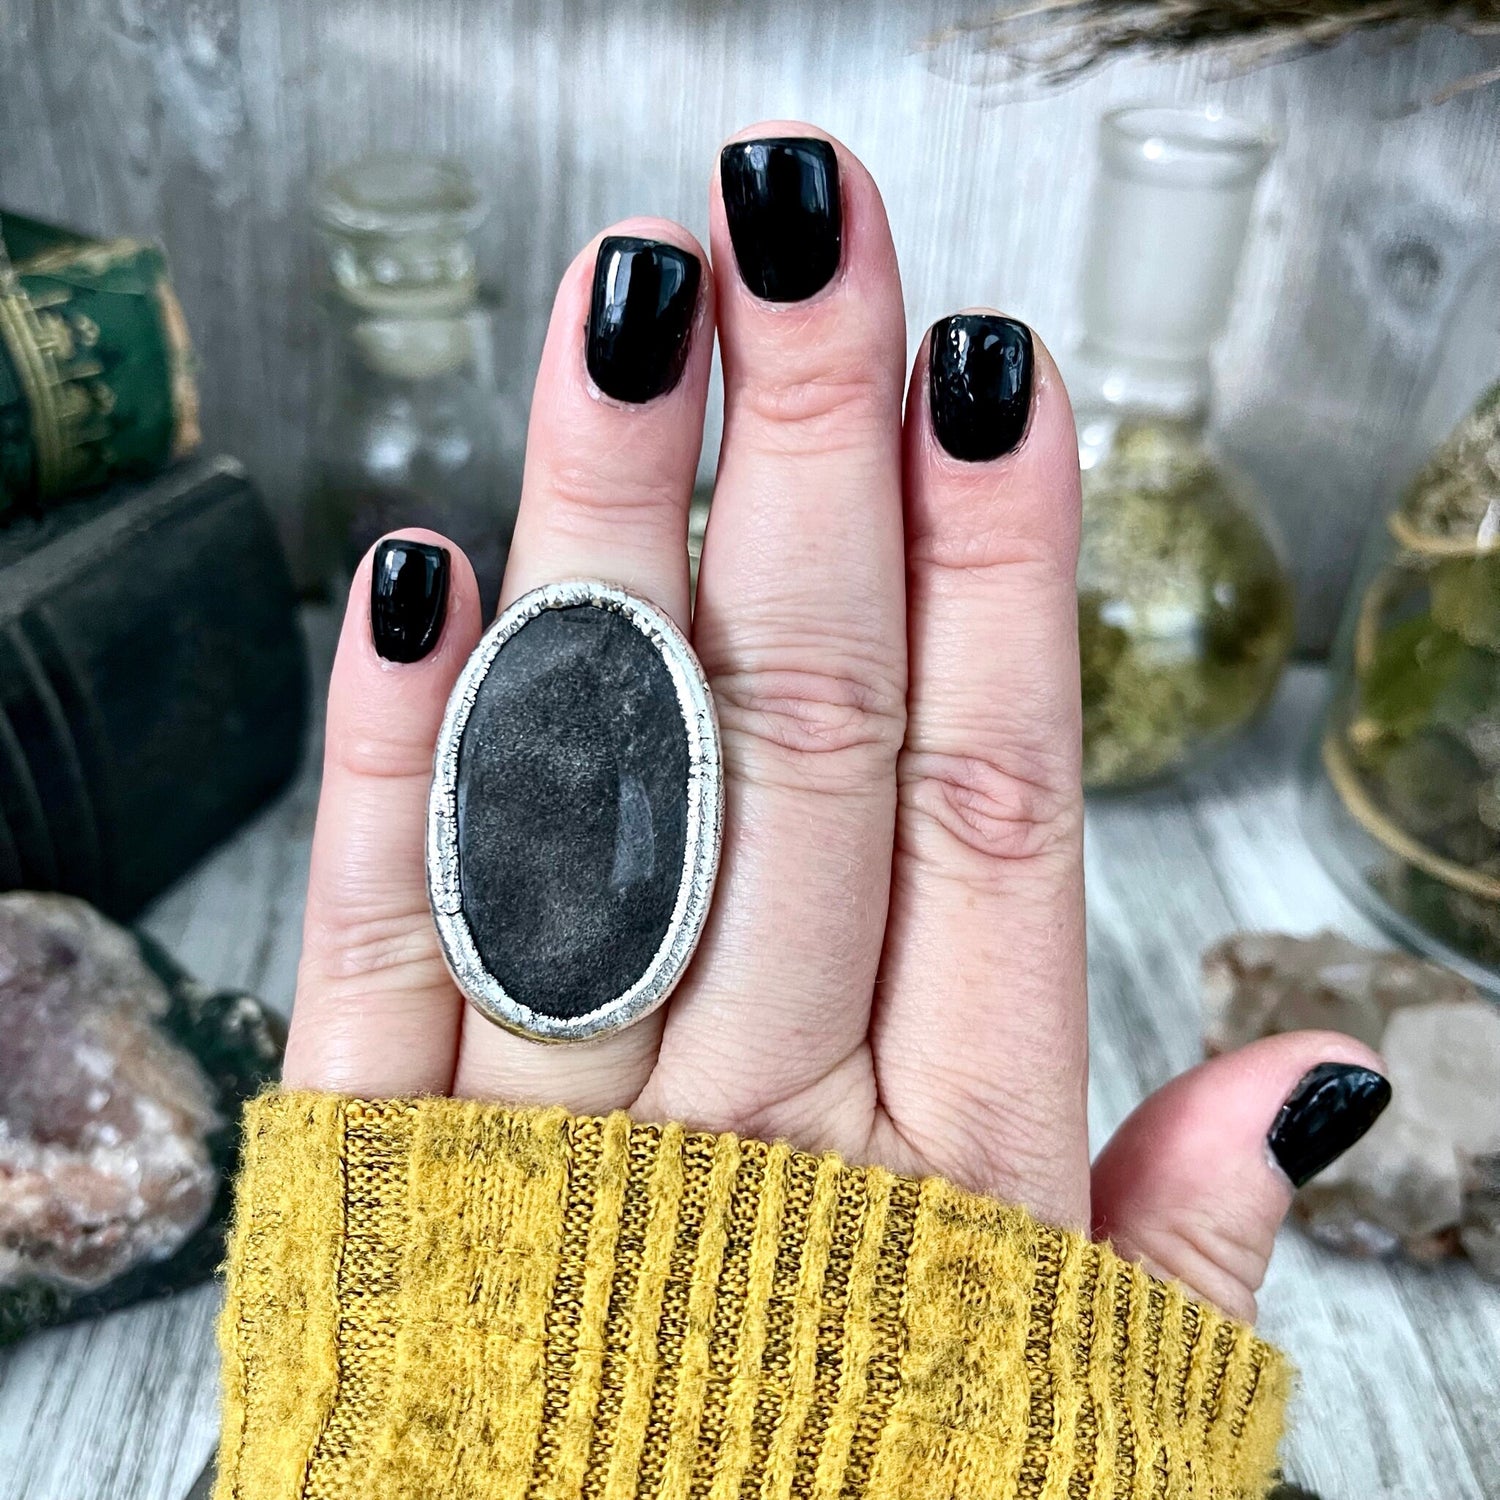 Size 6.5 Silver Sheen Obsidian Statement Ring in fine Silver / Foxlark Collection - One of a Kind